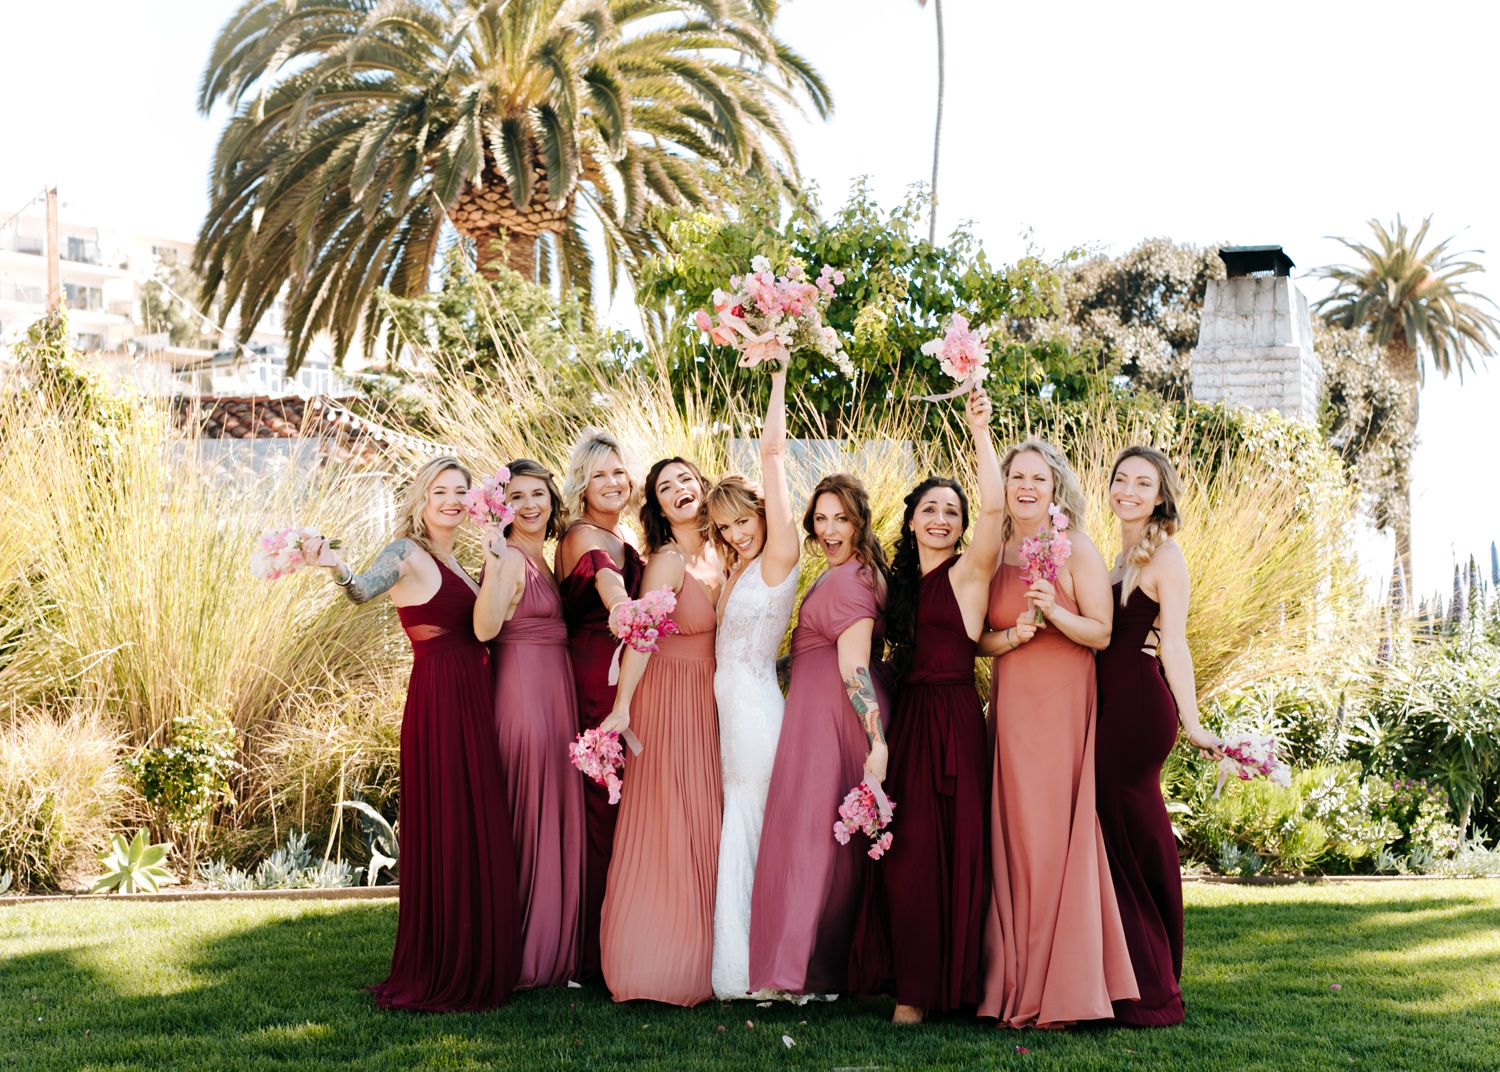 pink and red wedding party dresses, wedding party photos at Casino San Clemente